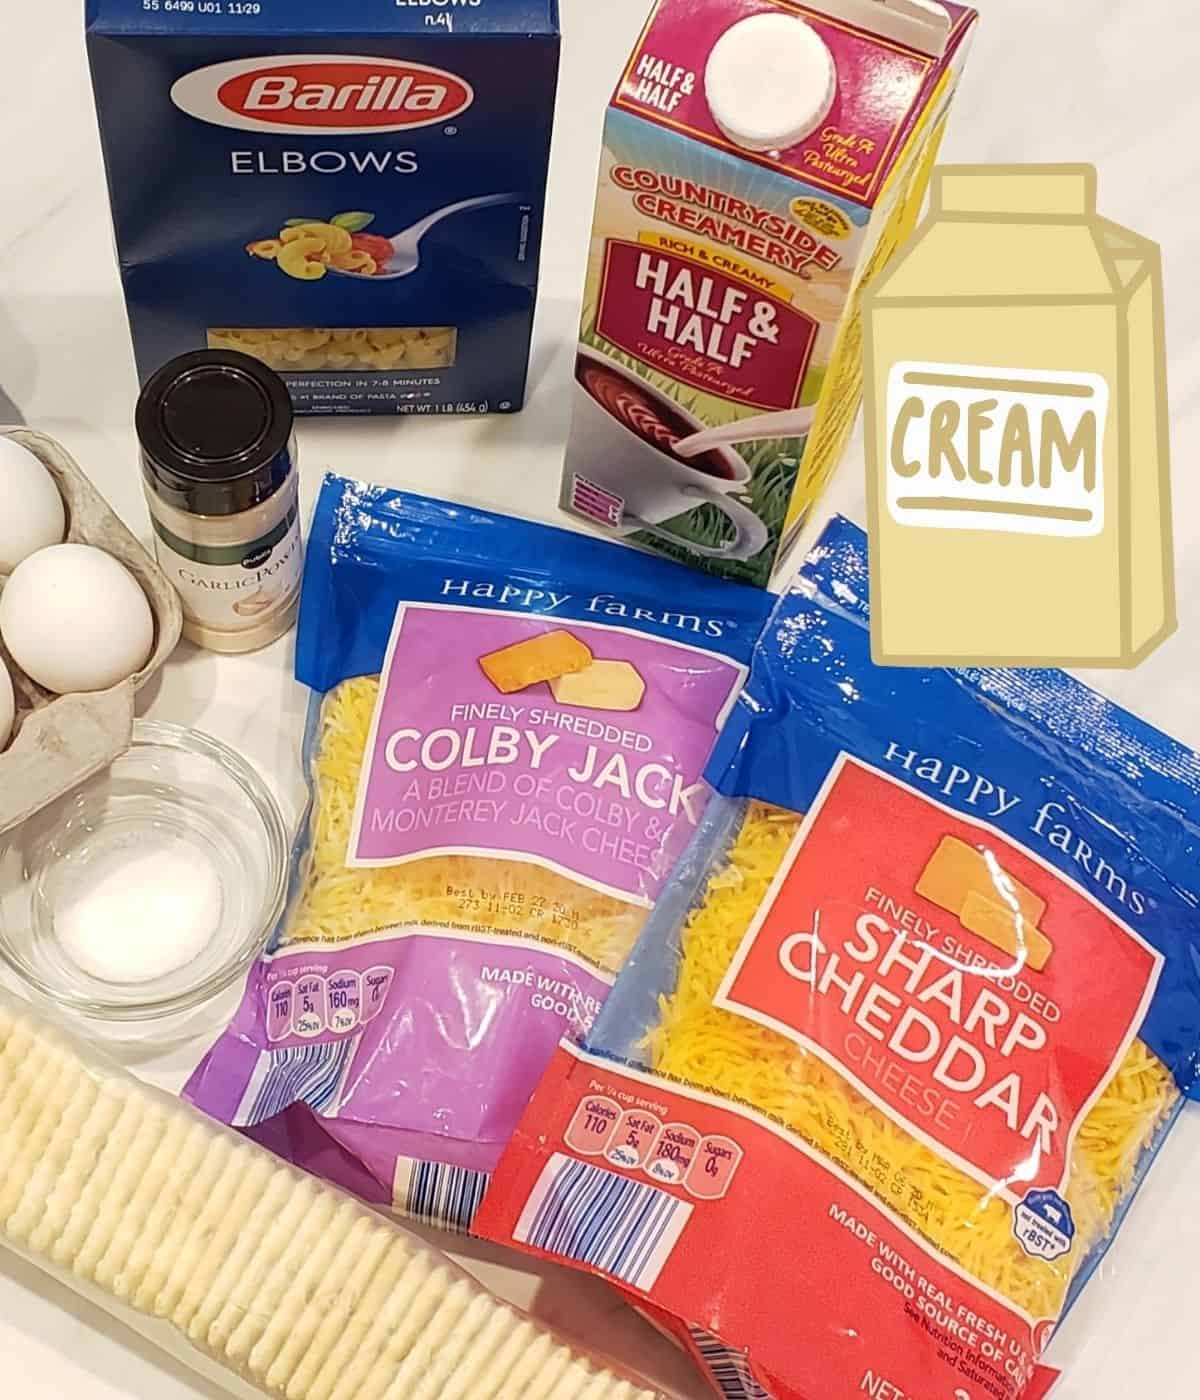 Ingredients for baked mac and cheese recipe: elbow macaroni, whipping cream, half and half, cheee, eggs